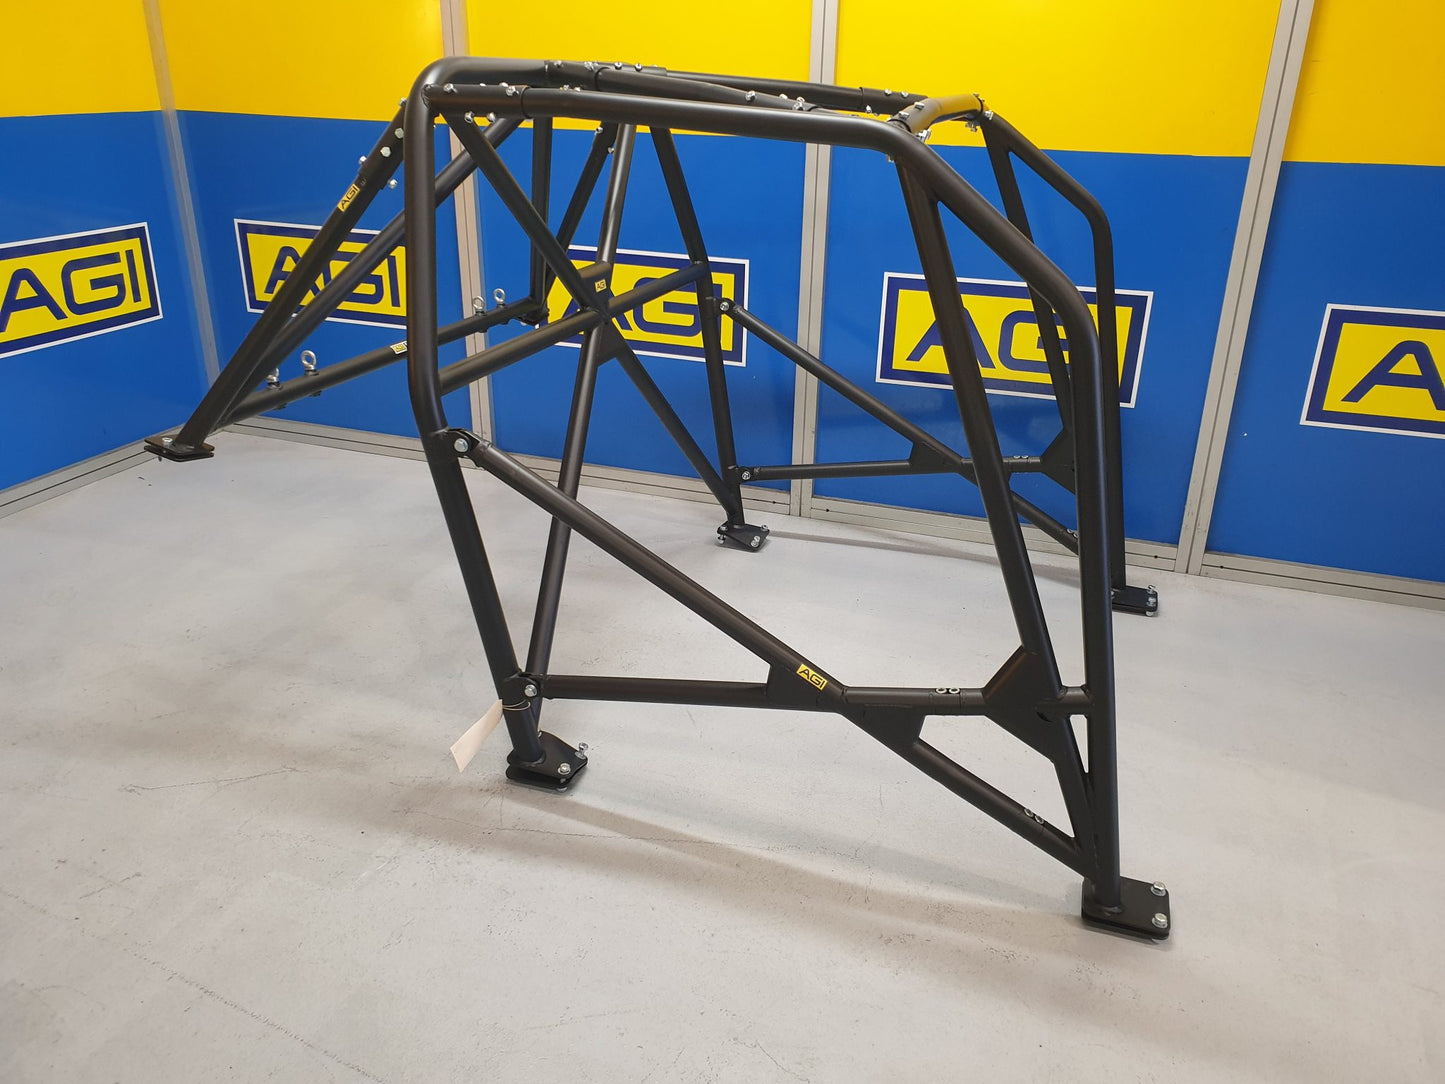 AGI roll cage VW GOLF MK5 – FULL CAGE 6PT BOLT IN, National Level race meetings, Rallies or Tarmac events